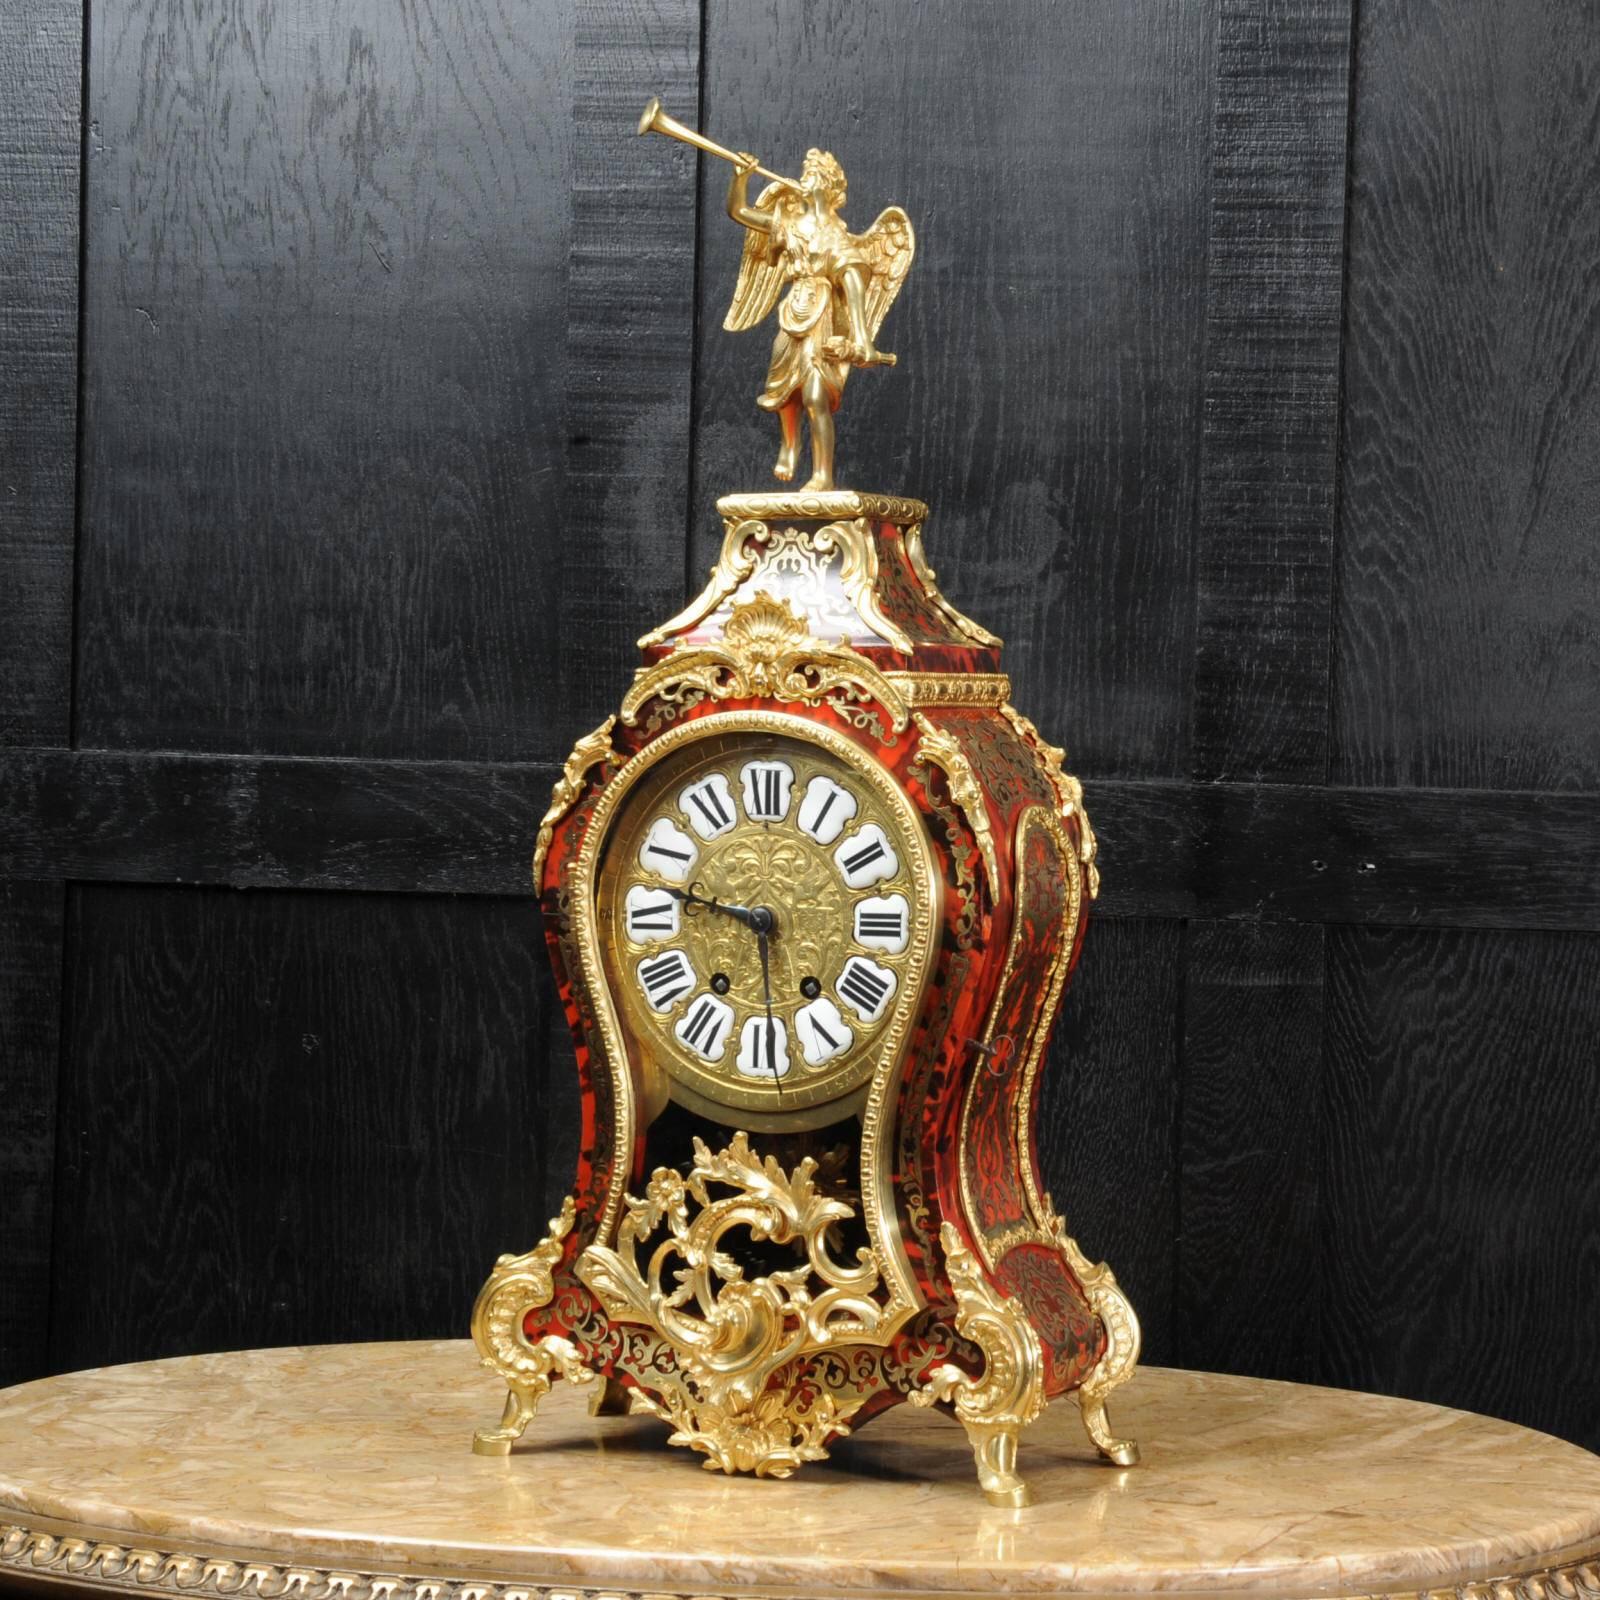 A stunning original antique French Rococo clock standing over 2 feet in height. Sumptuously made Boulle marquetry of red shell veneer delicately inlaid with brass and mounted with fine ormolu (fine gilded bronze). Beautiful Rococo shape with glazed